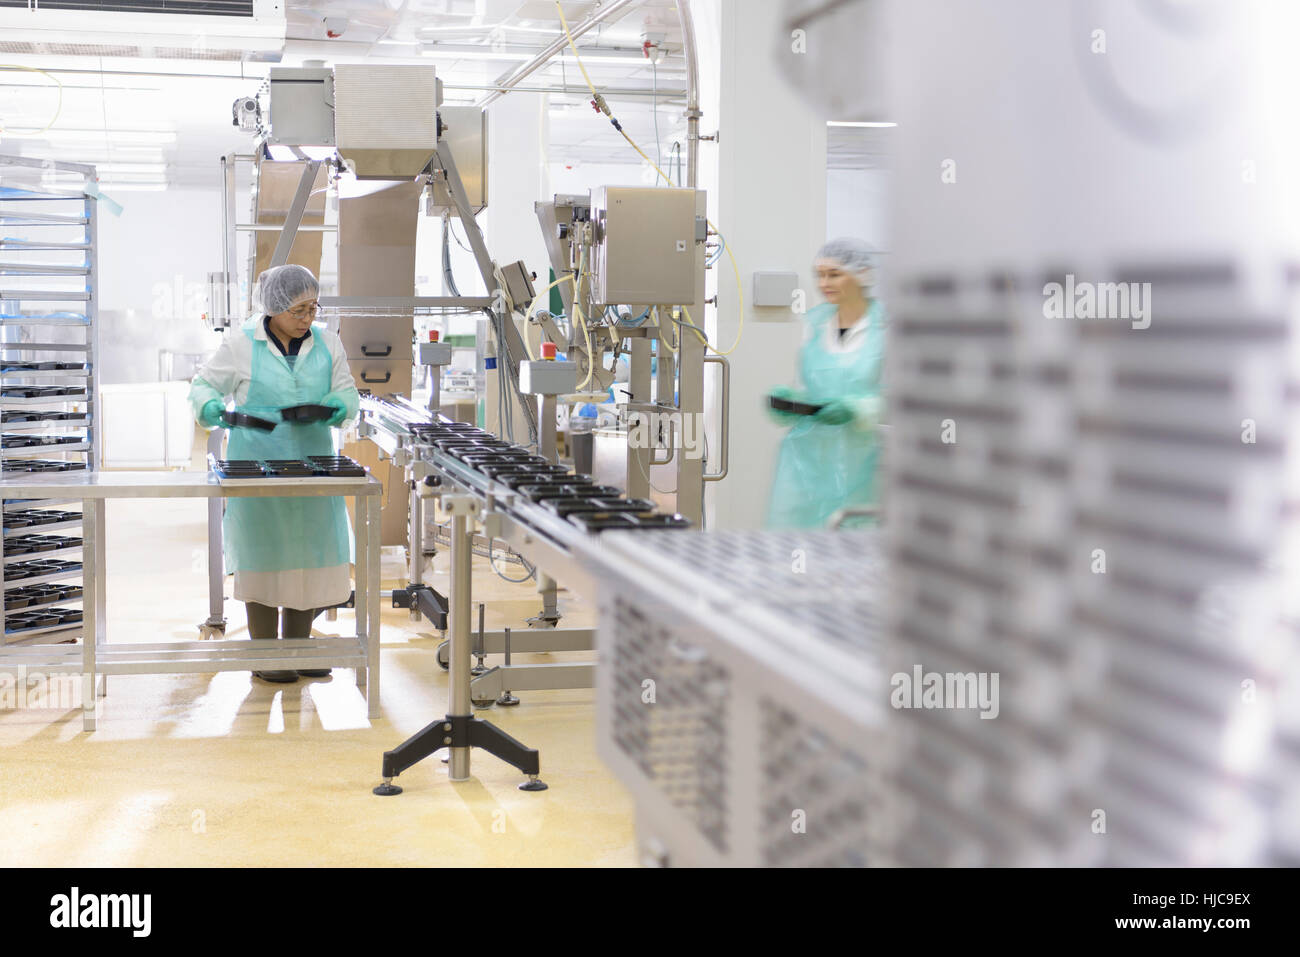 Ready-made meal production line in Asian food factory Stock Photo